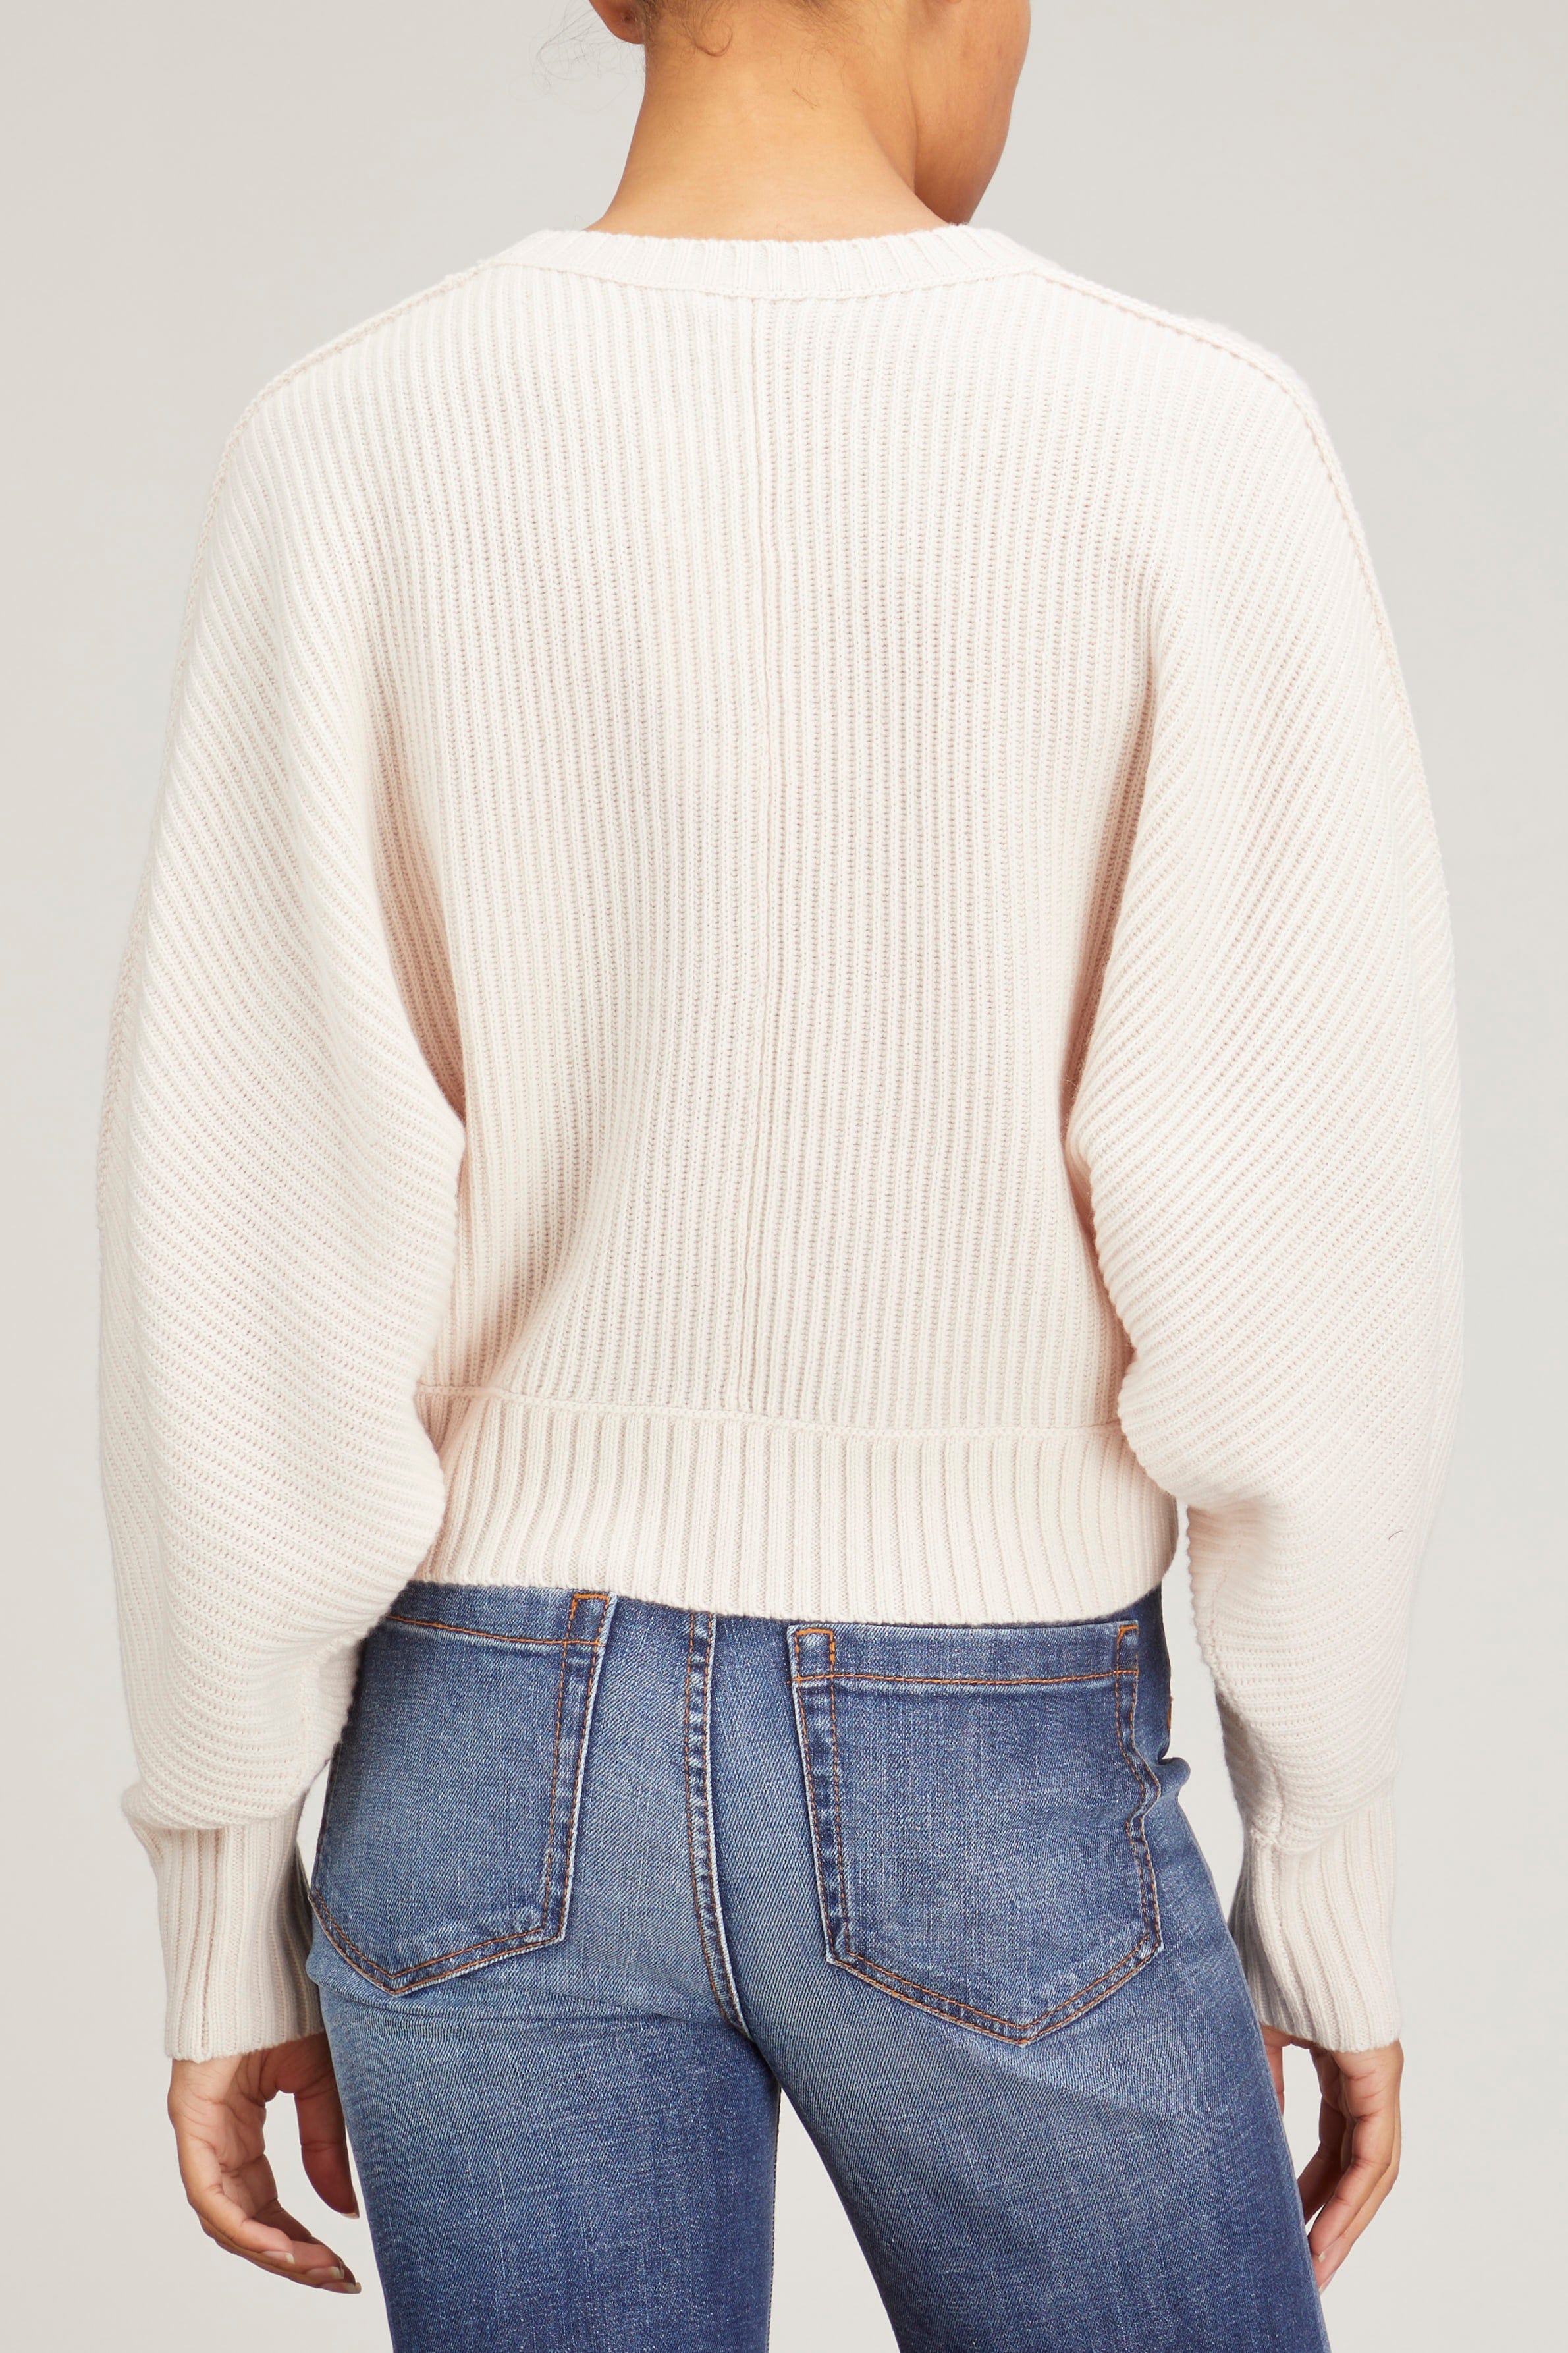 Dorothee Schumacher Sweaters Modern Statements Ribbed Pullover in Porcelain White Dorothee Schumacher Modern Statements Ribbed Pullover in Porcelain White